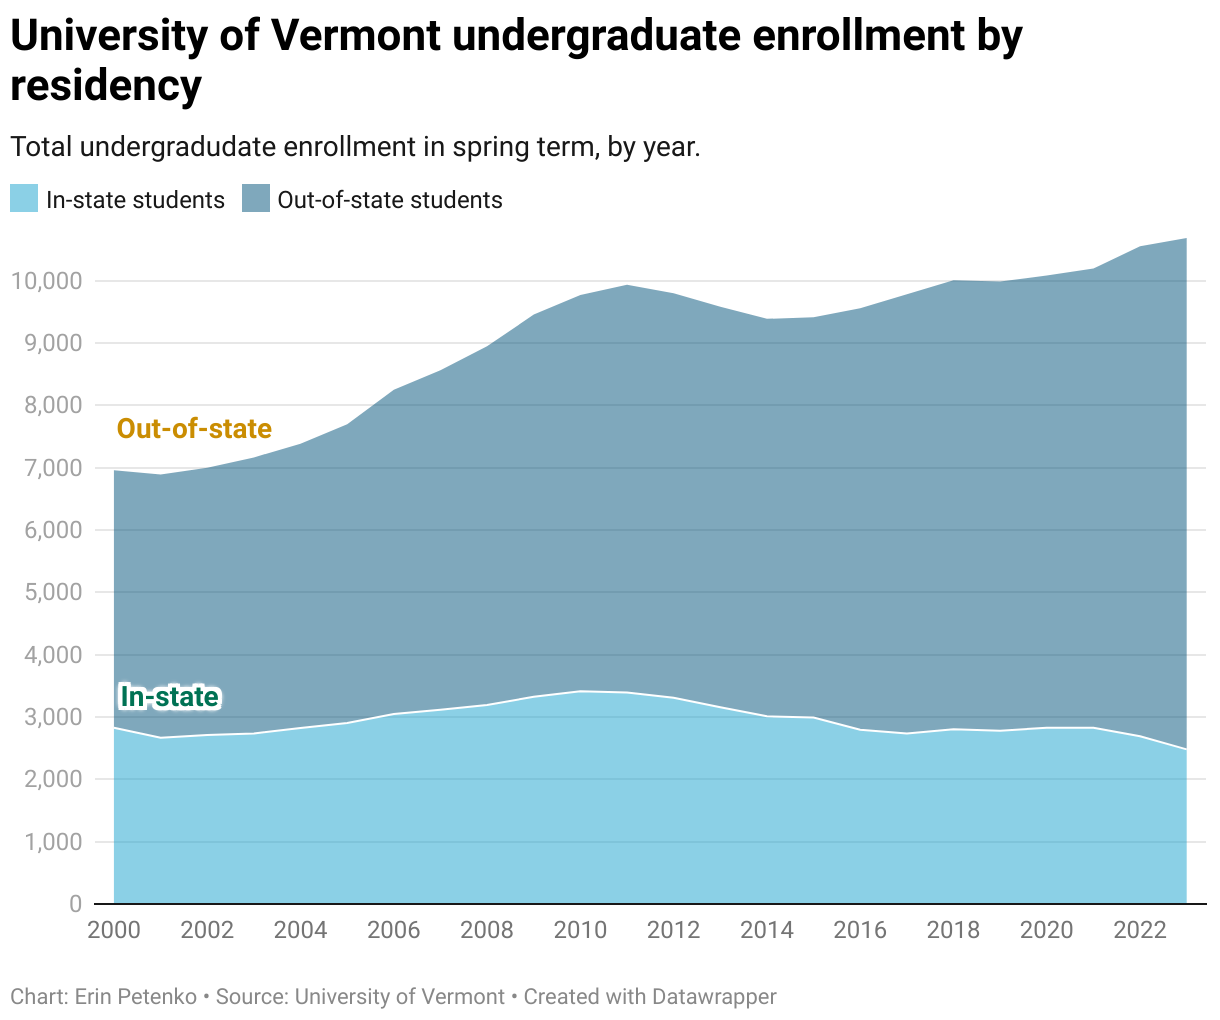 UVM reported 8,200 out-of-state undergraduates in spring 2023, compared to roughly 2,500 in-state undergraduates. The number of out-of-state undergrads has risen 98% since the year 2000, while in-state enrollment decreased slightly, by 12%. 